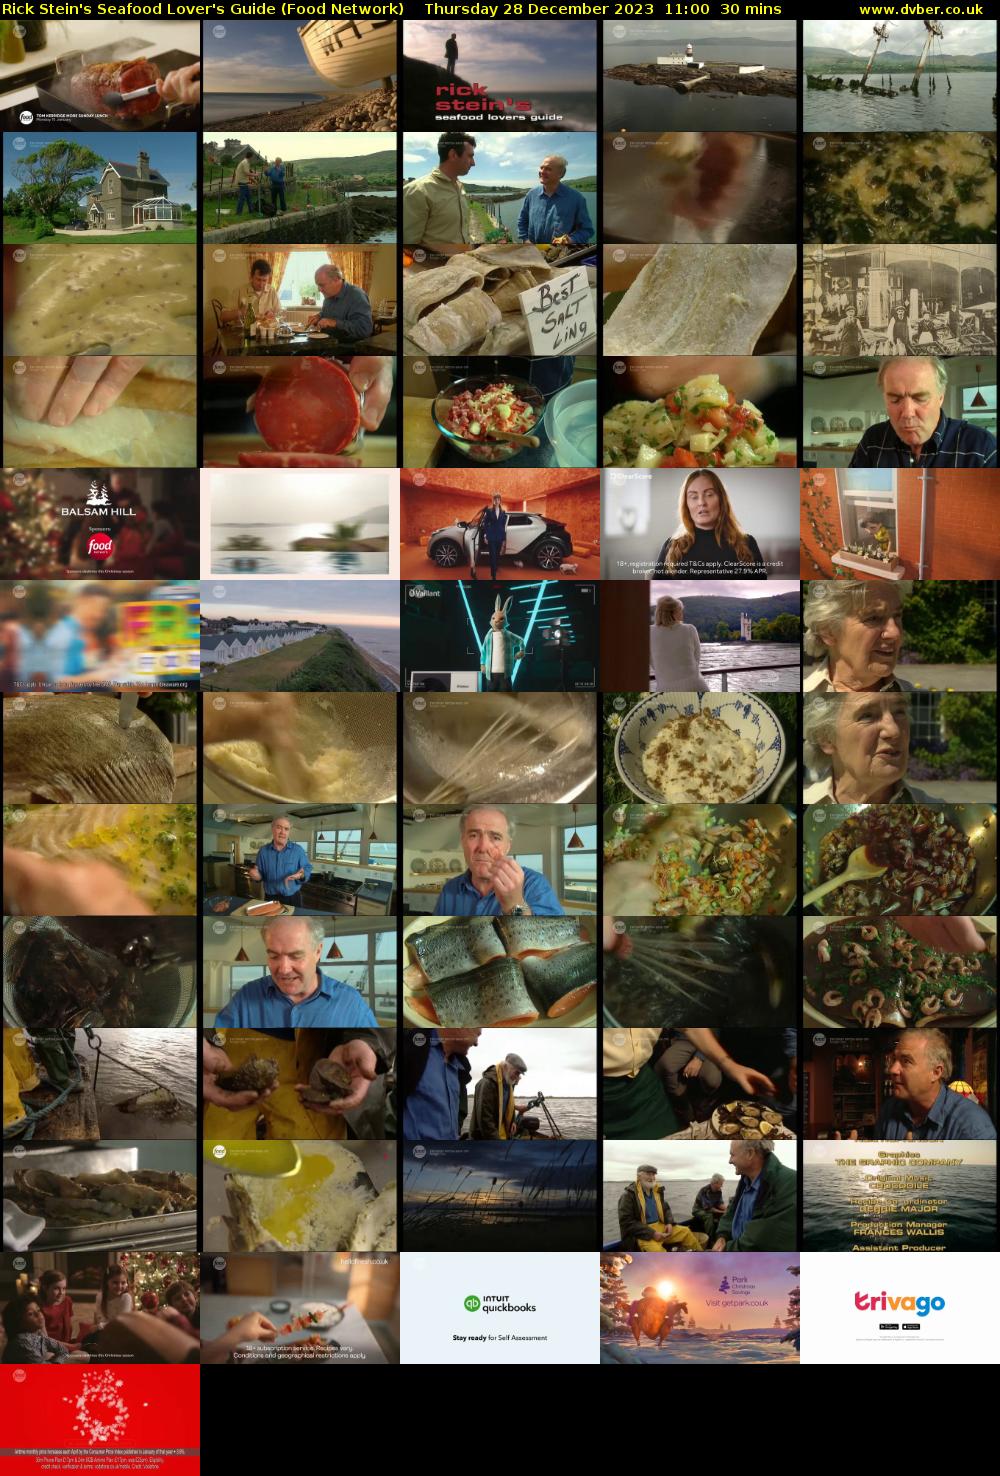 Rick Stein's Seafood Lover's Guide (Food Network) Thursday 28 December 2023 11:00 - 11:30